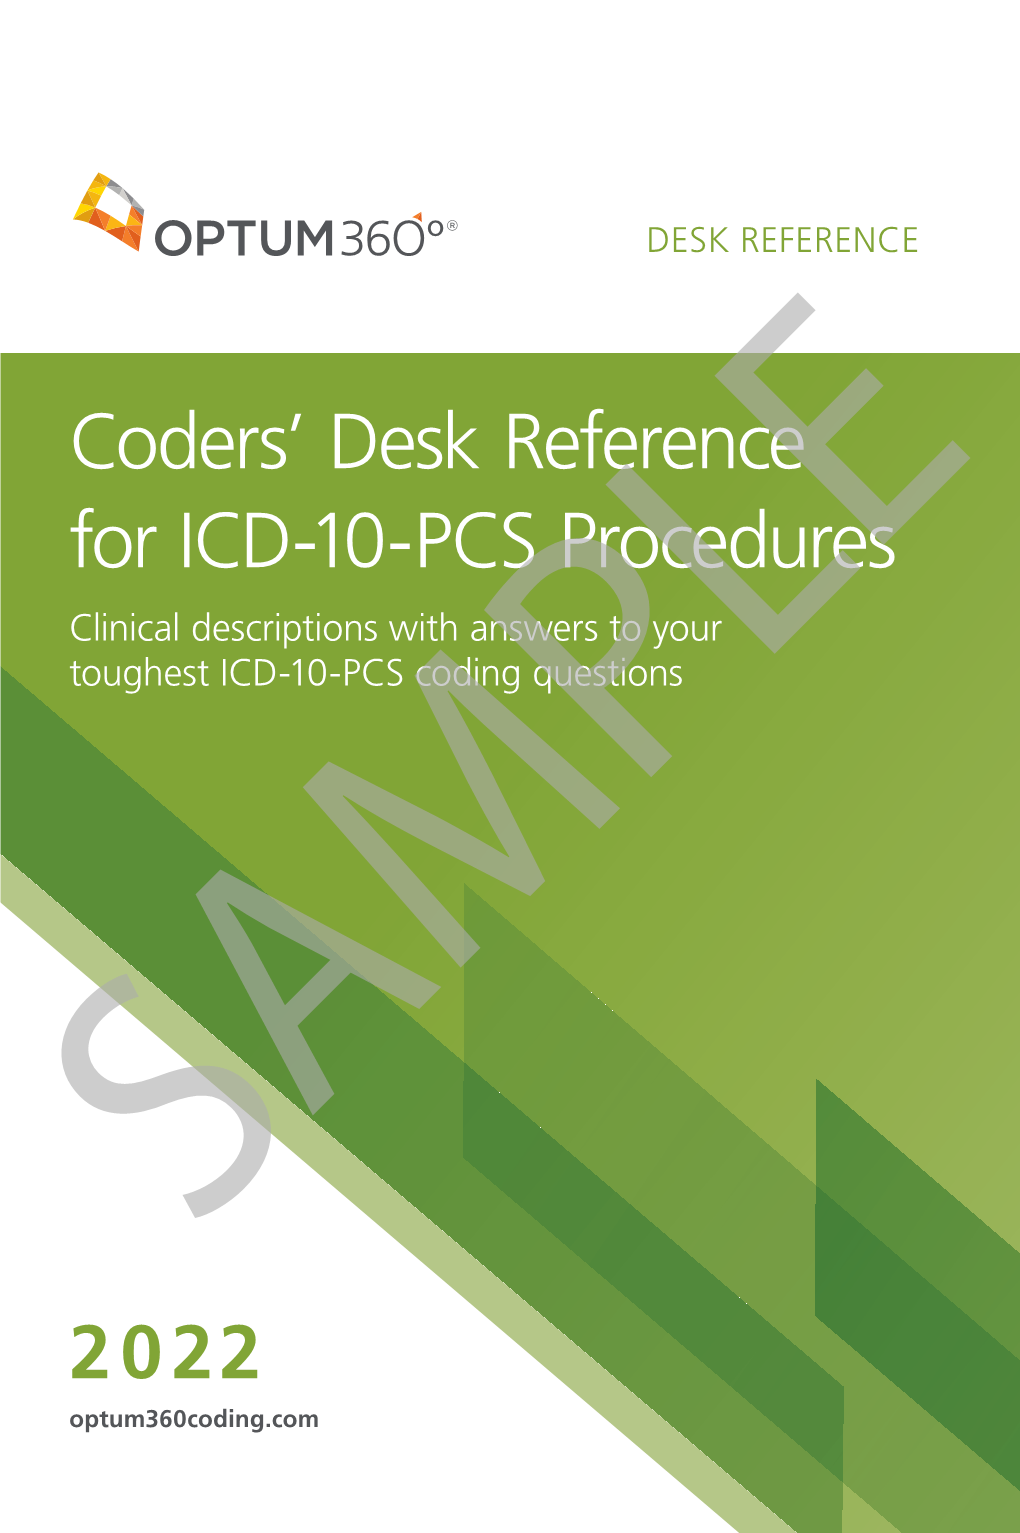 Coders' Desk Reference for ICD-10-PCS Procedures